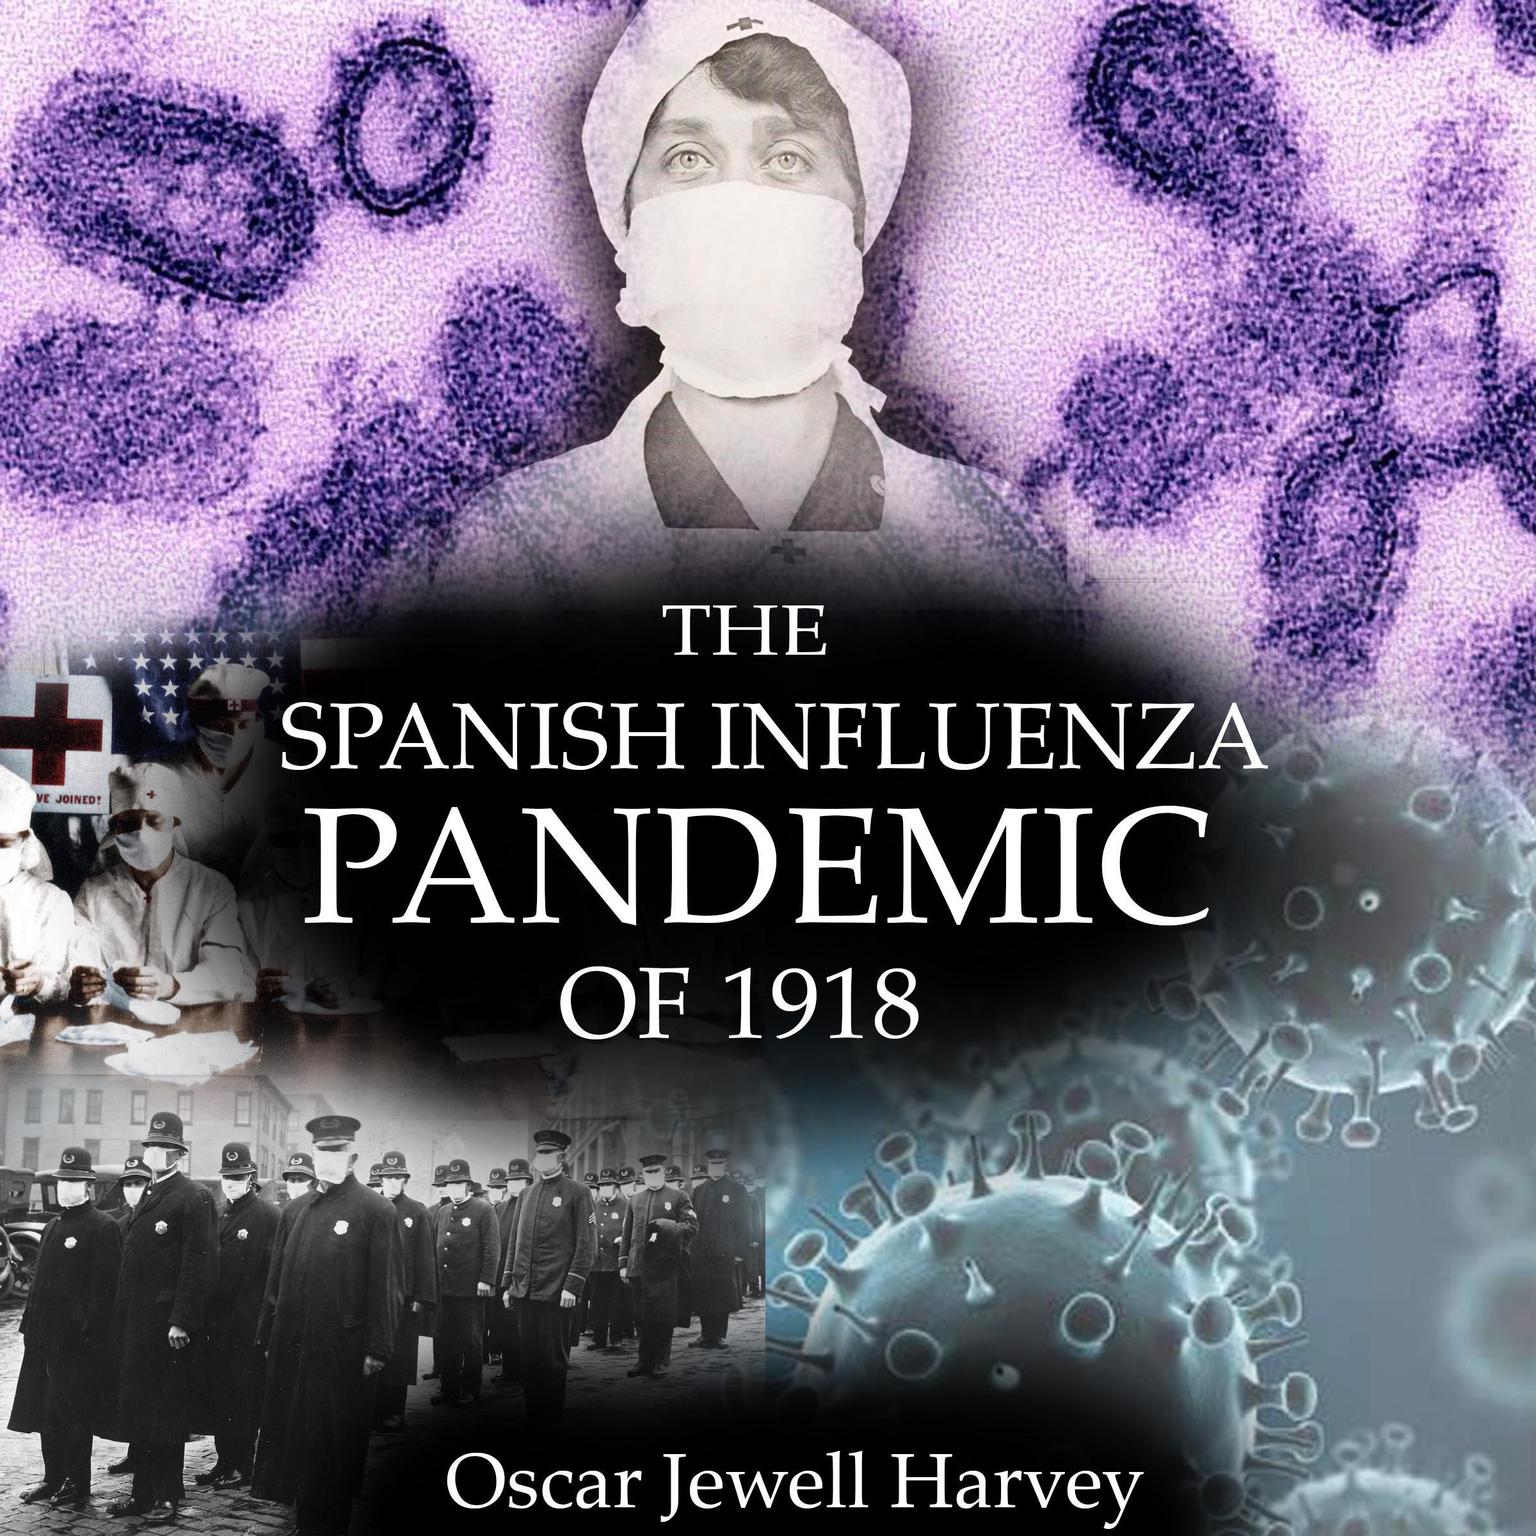 The Spanish Influenza Pandemic of 1918 Audiobook by Oscar Jewell Harvey